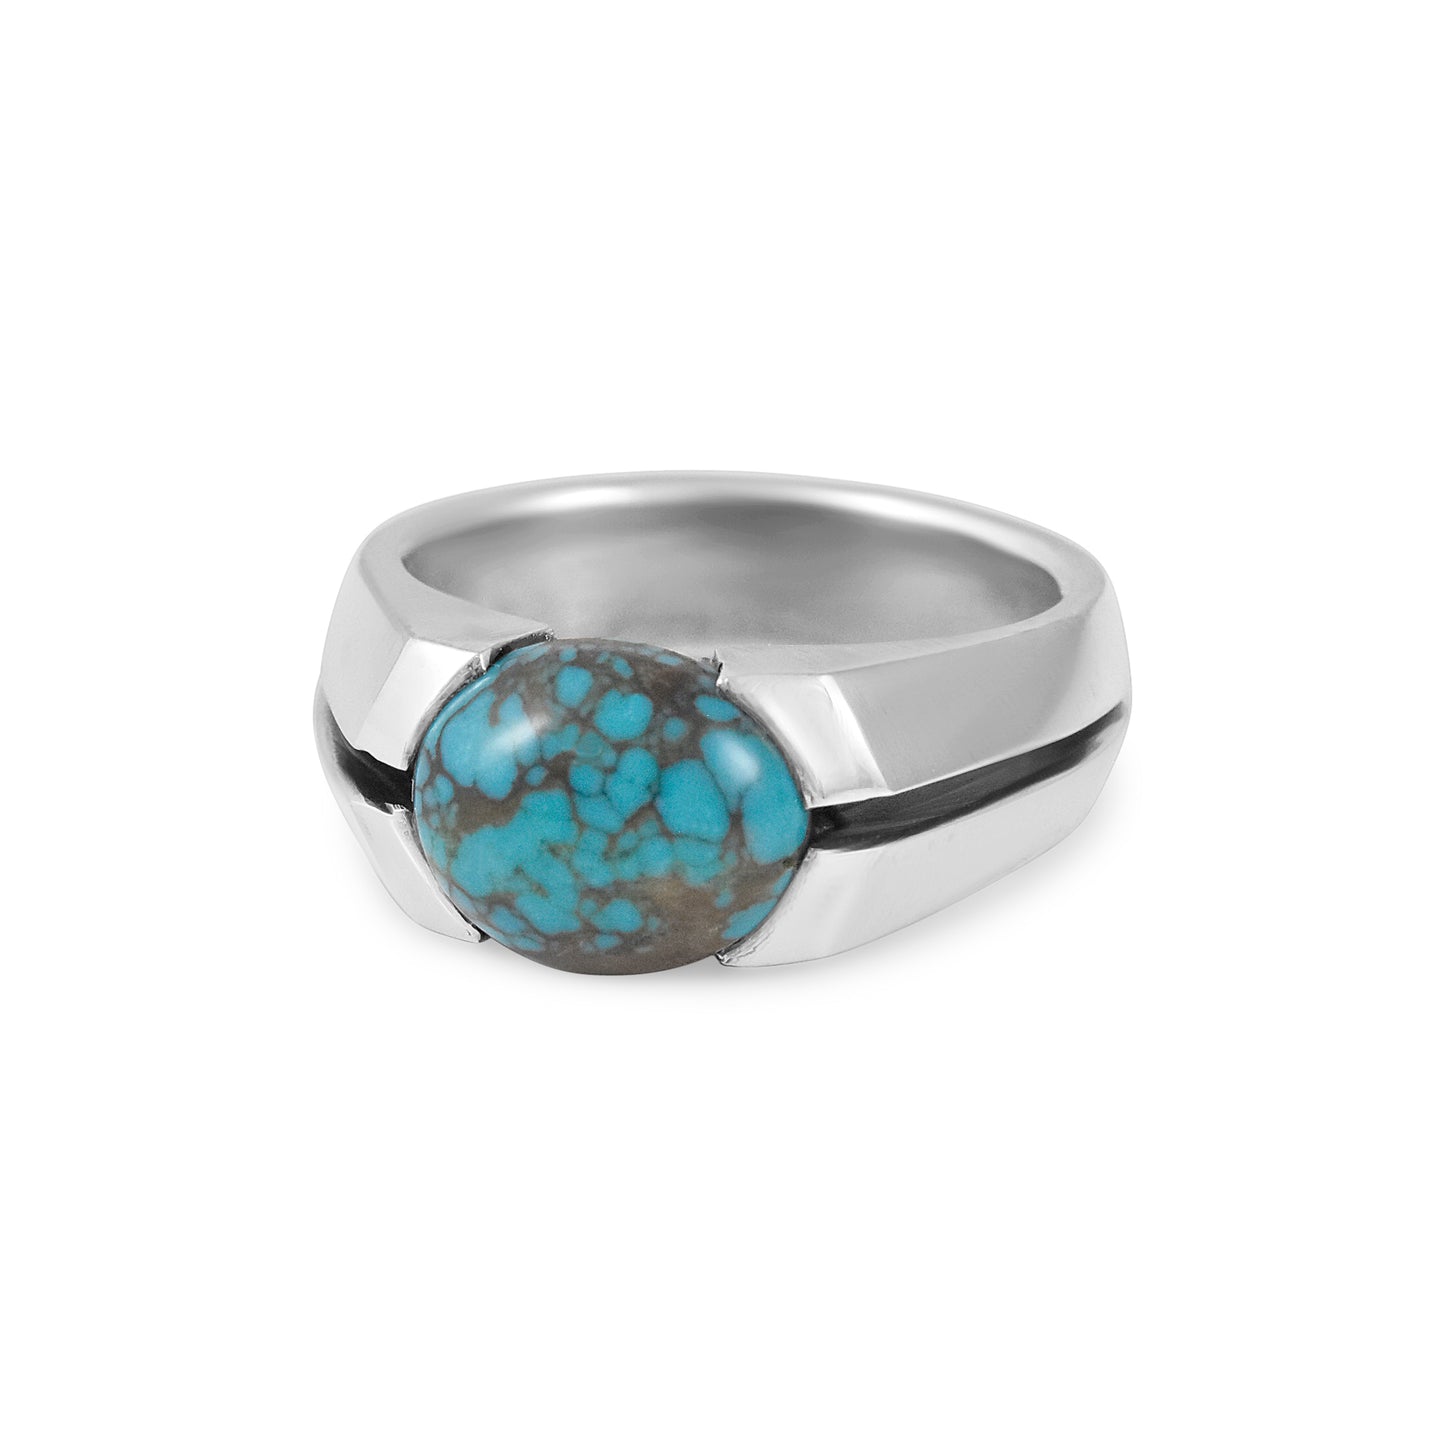 Turquoise Viper ring